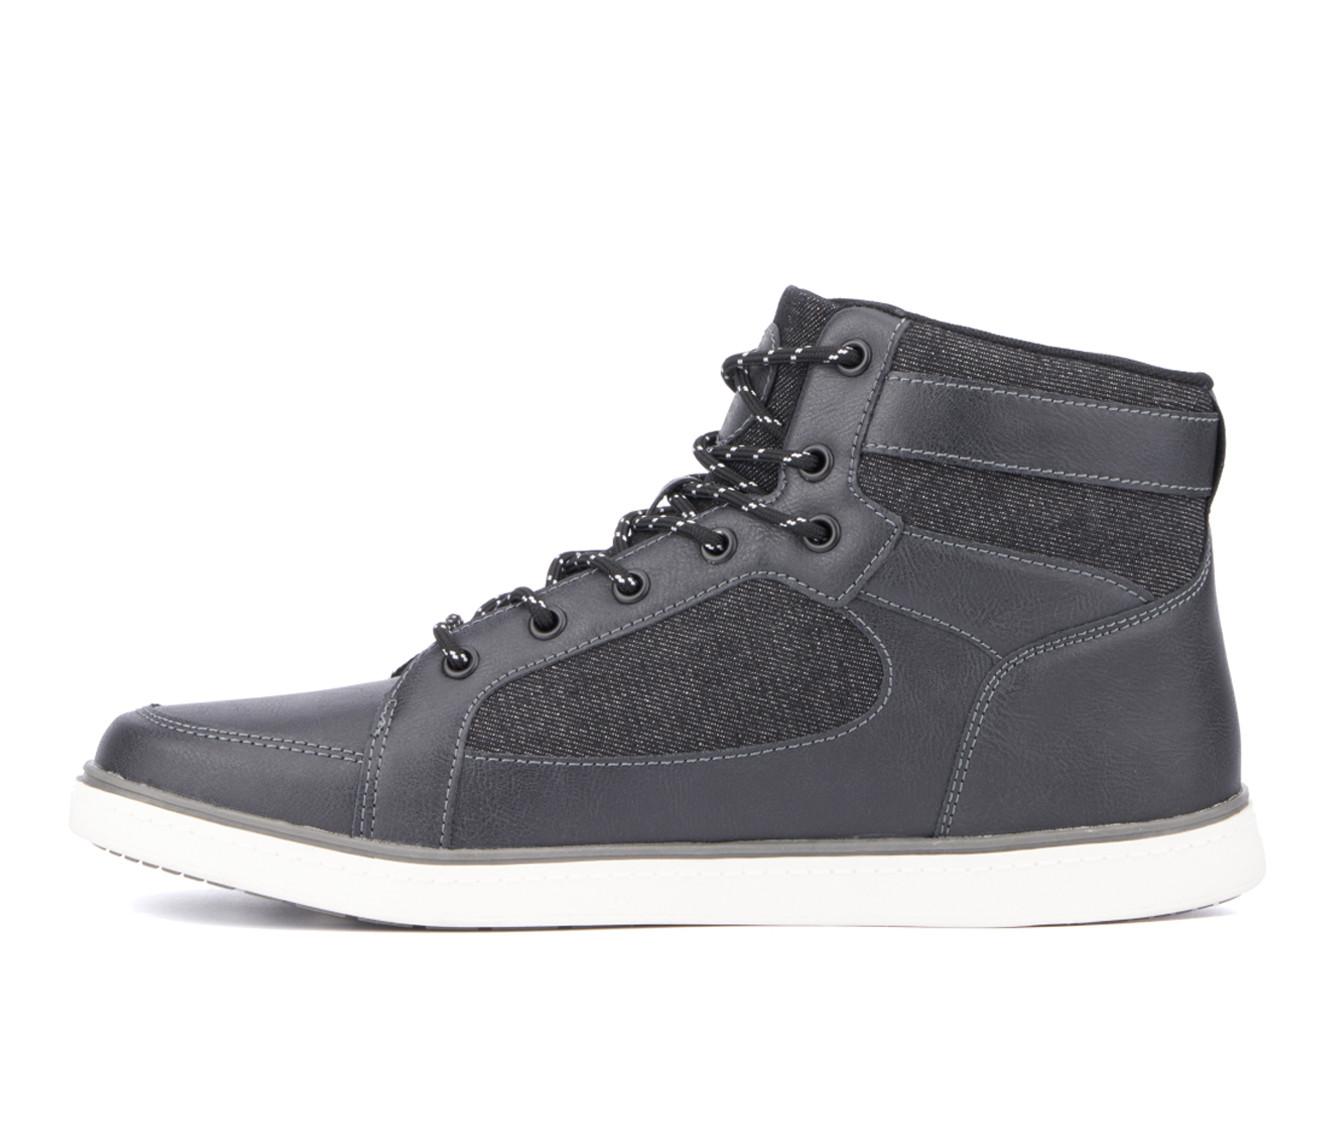 Men's Reserved Footwear Austin High-Top Fashion Sneakers